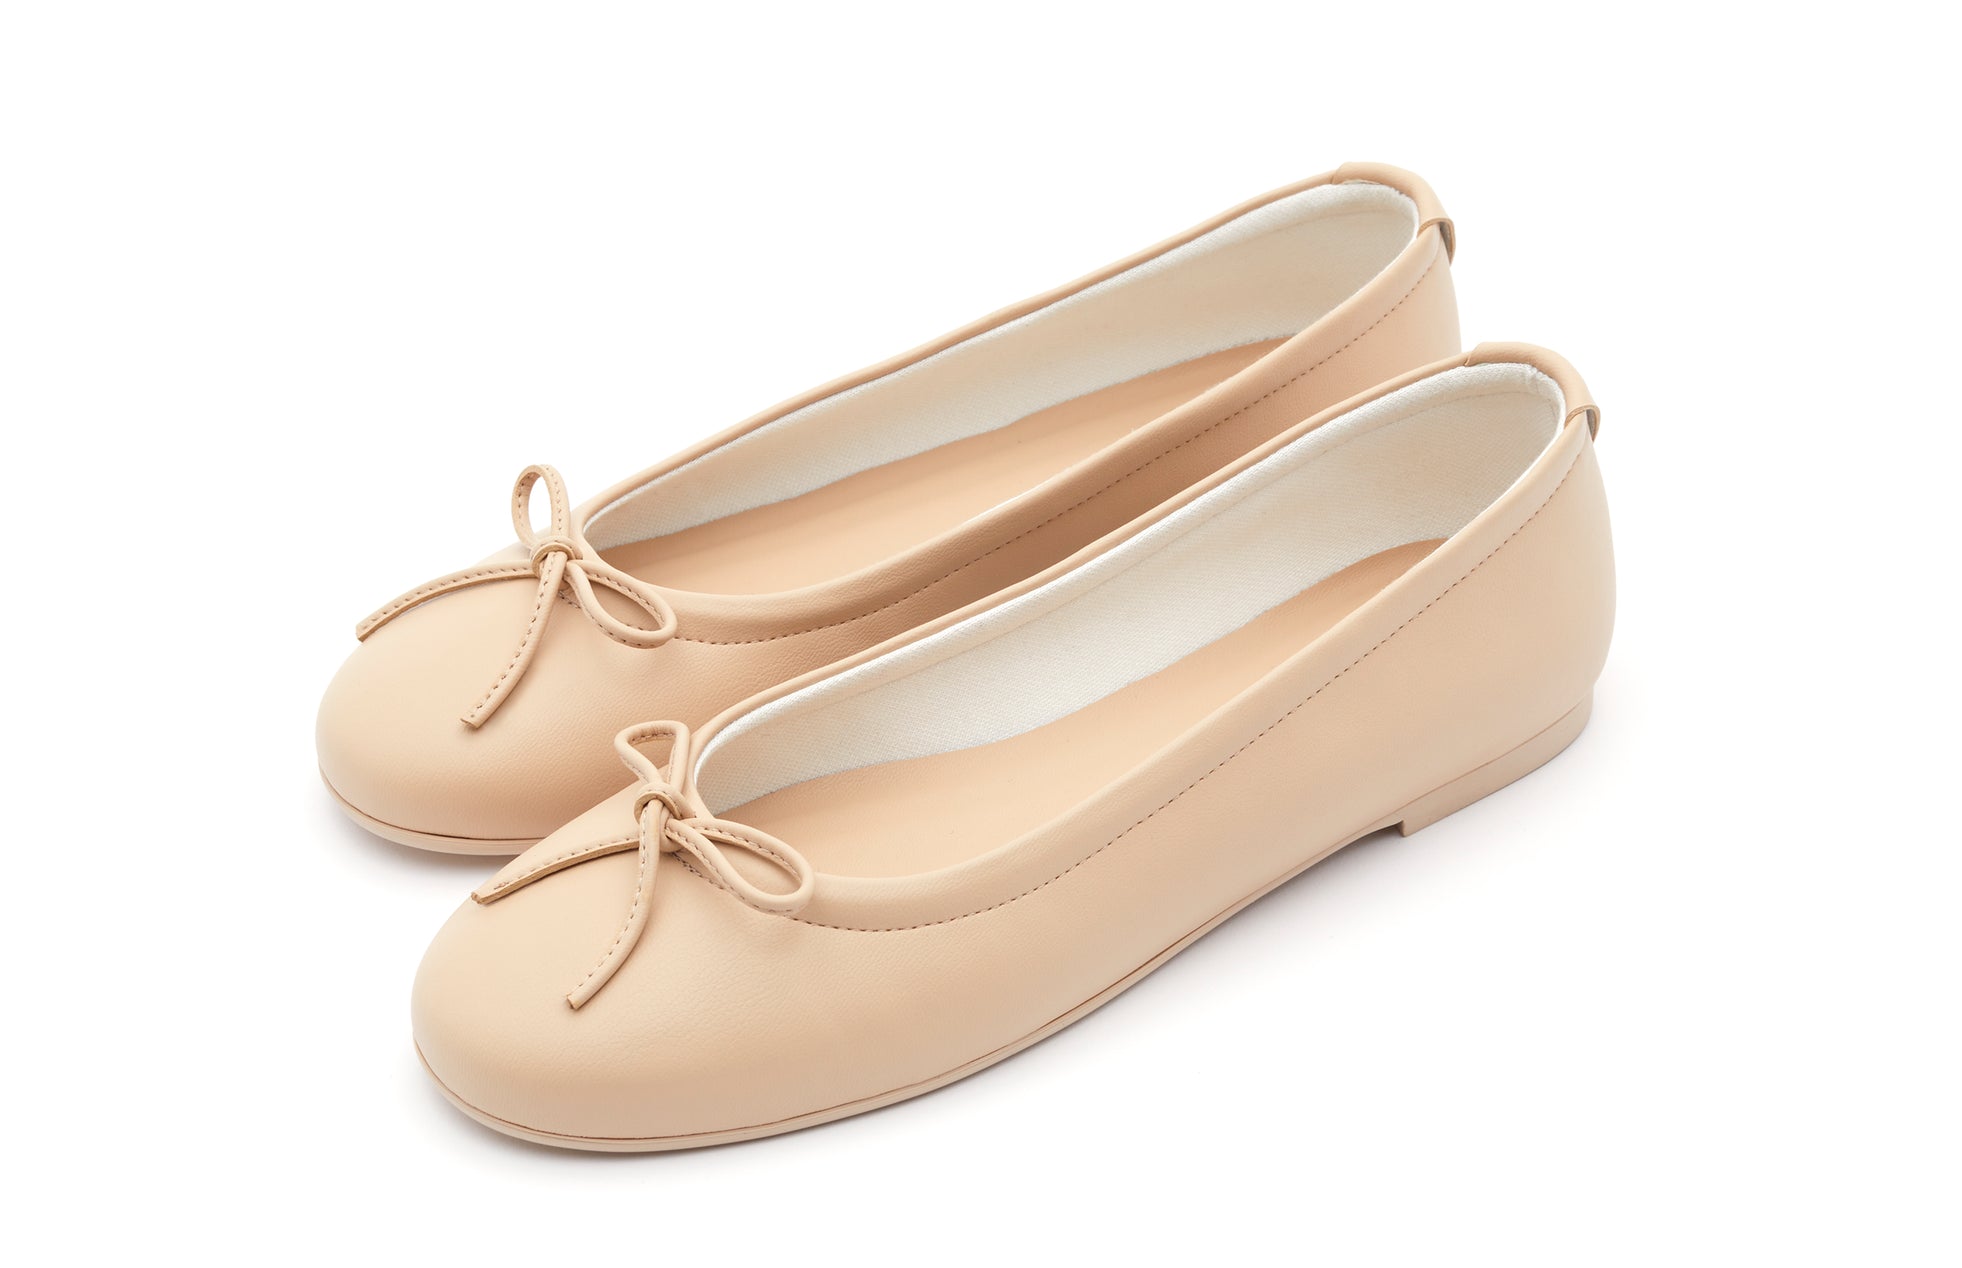 The Ballet Flat in Banbū Leather in Latte image 1